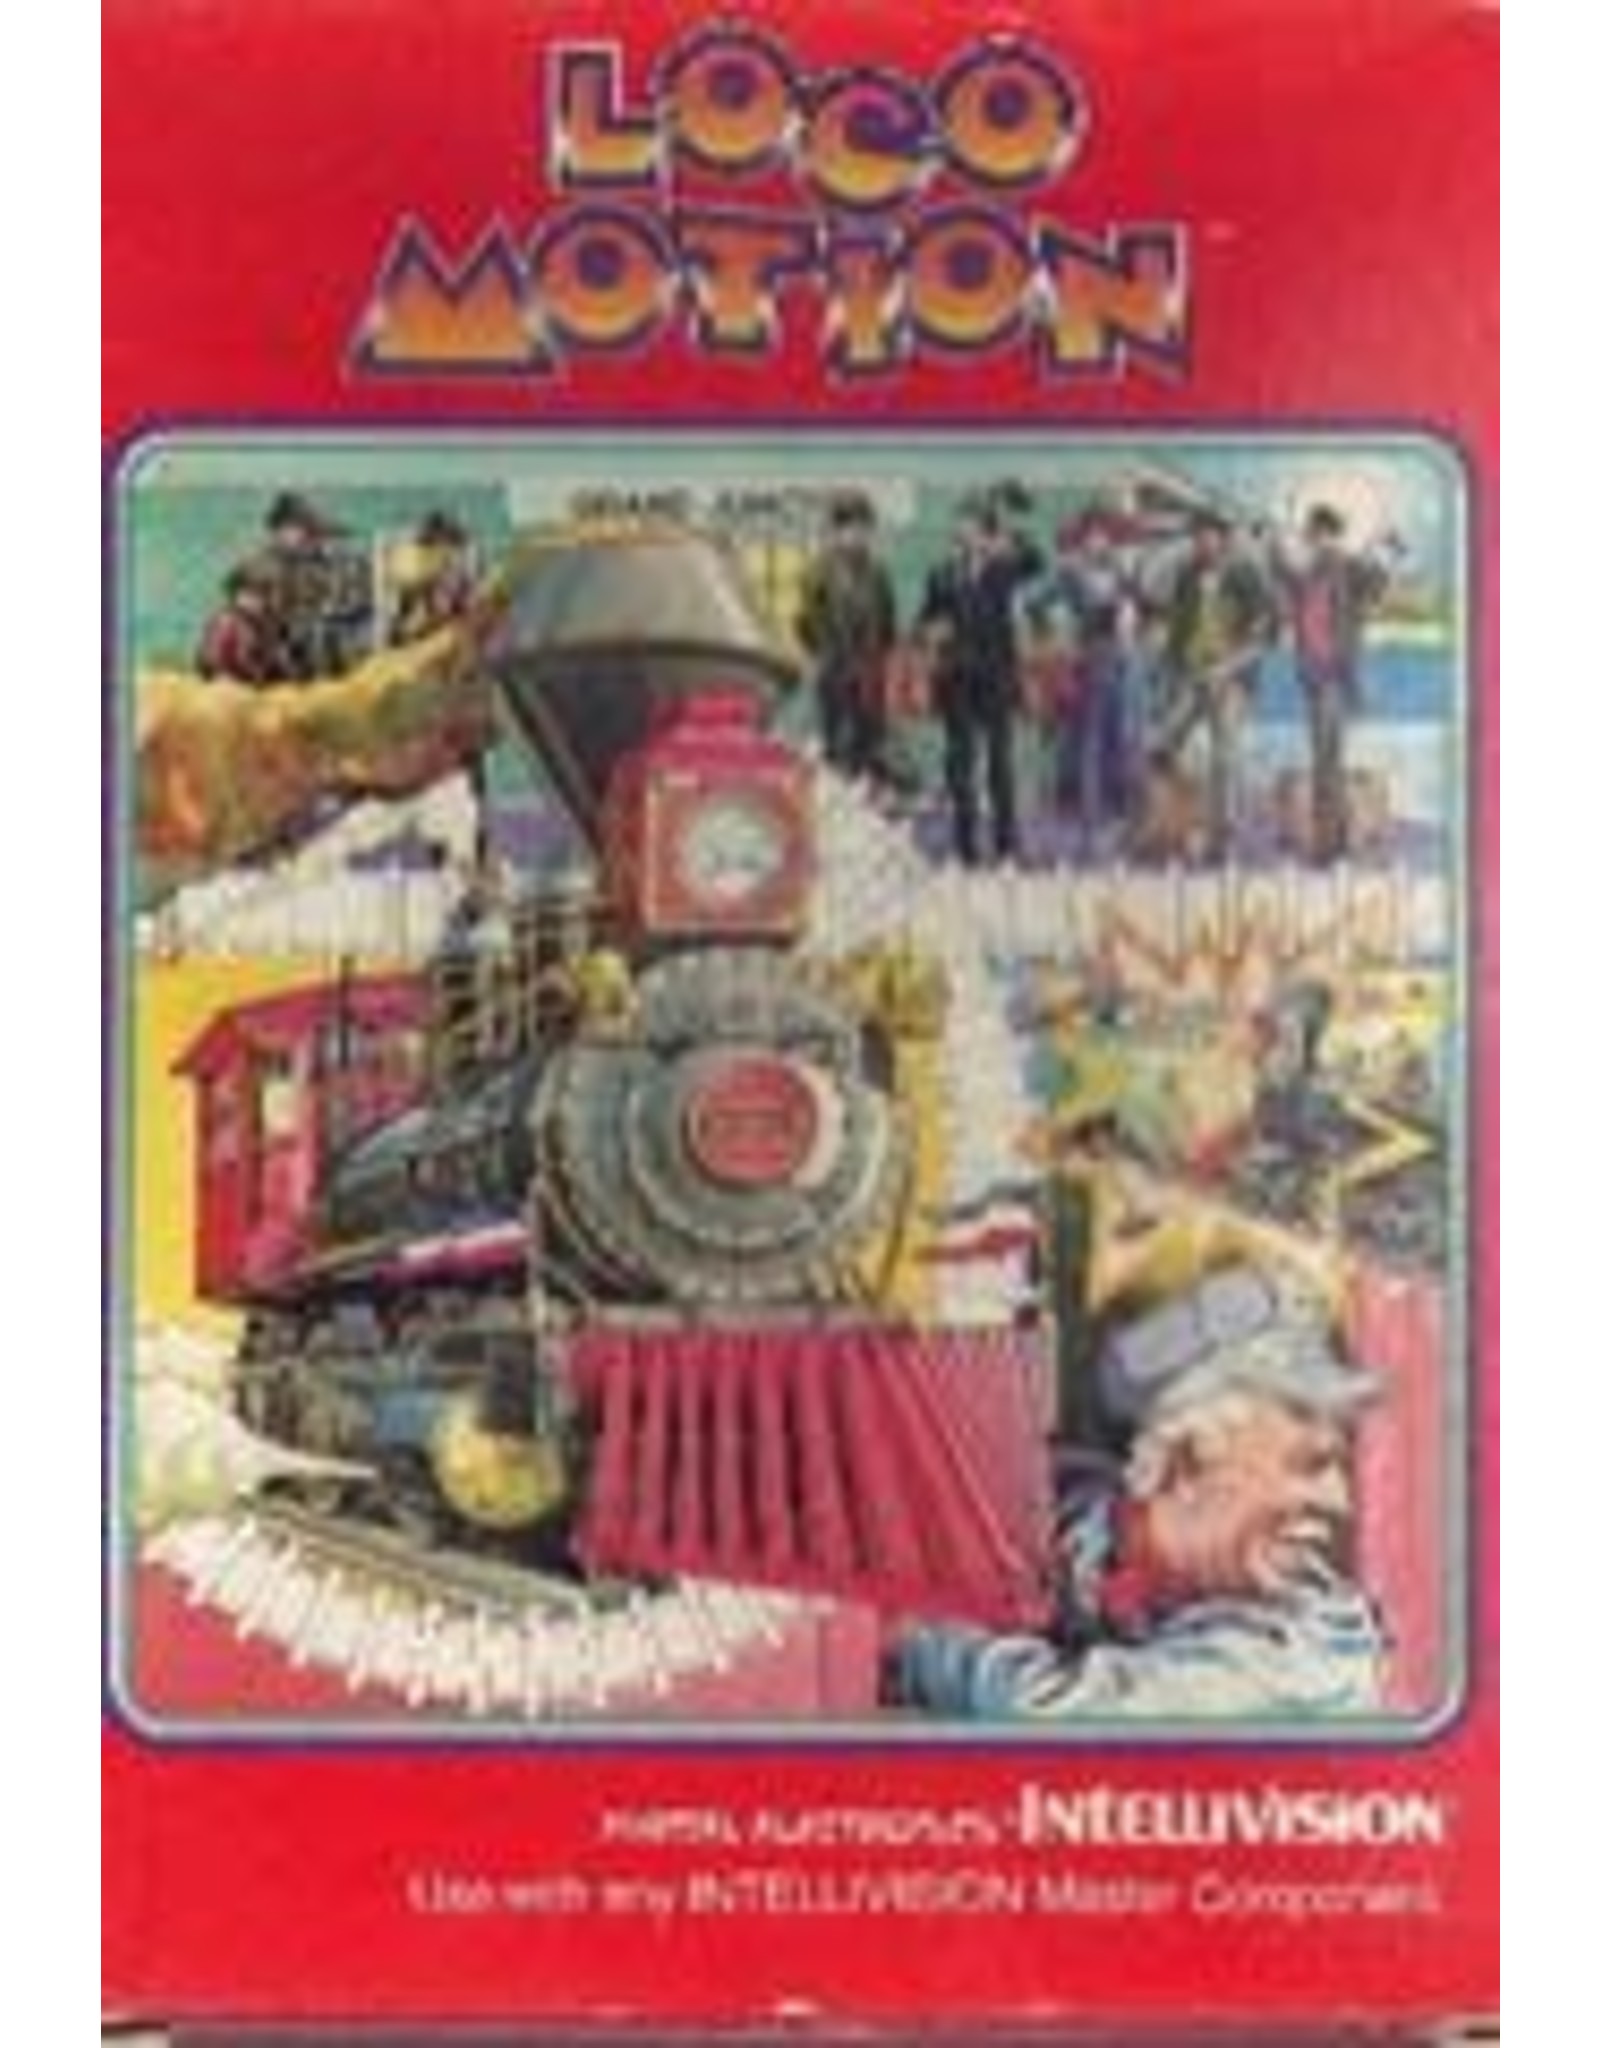 Intellivision Loco-Motion (Cart Only)